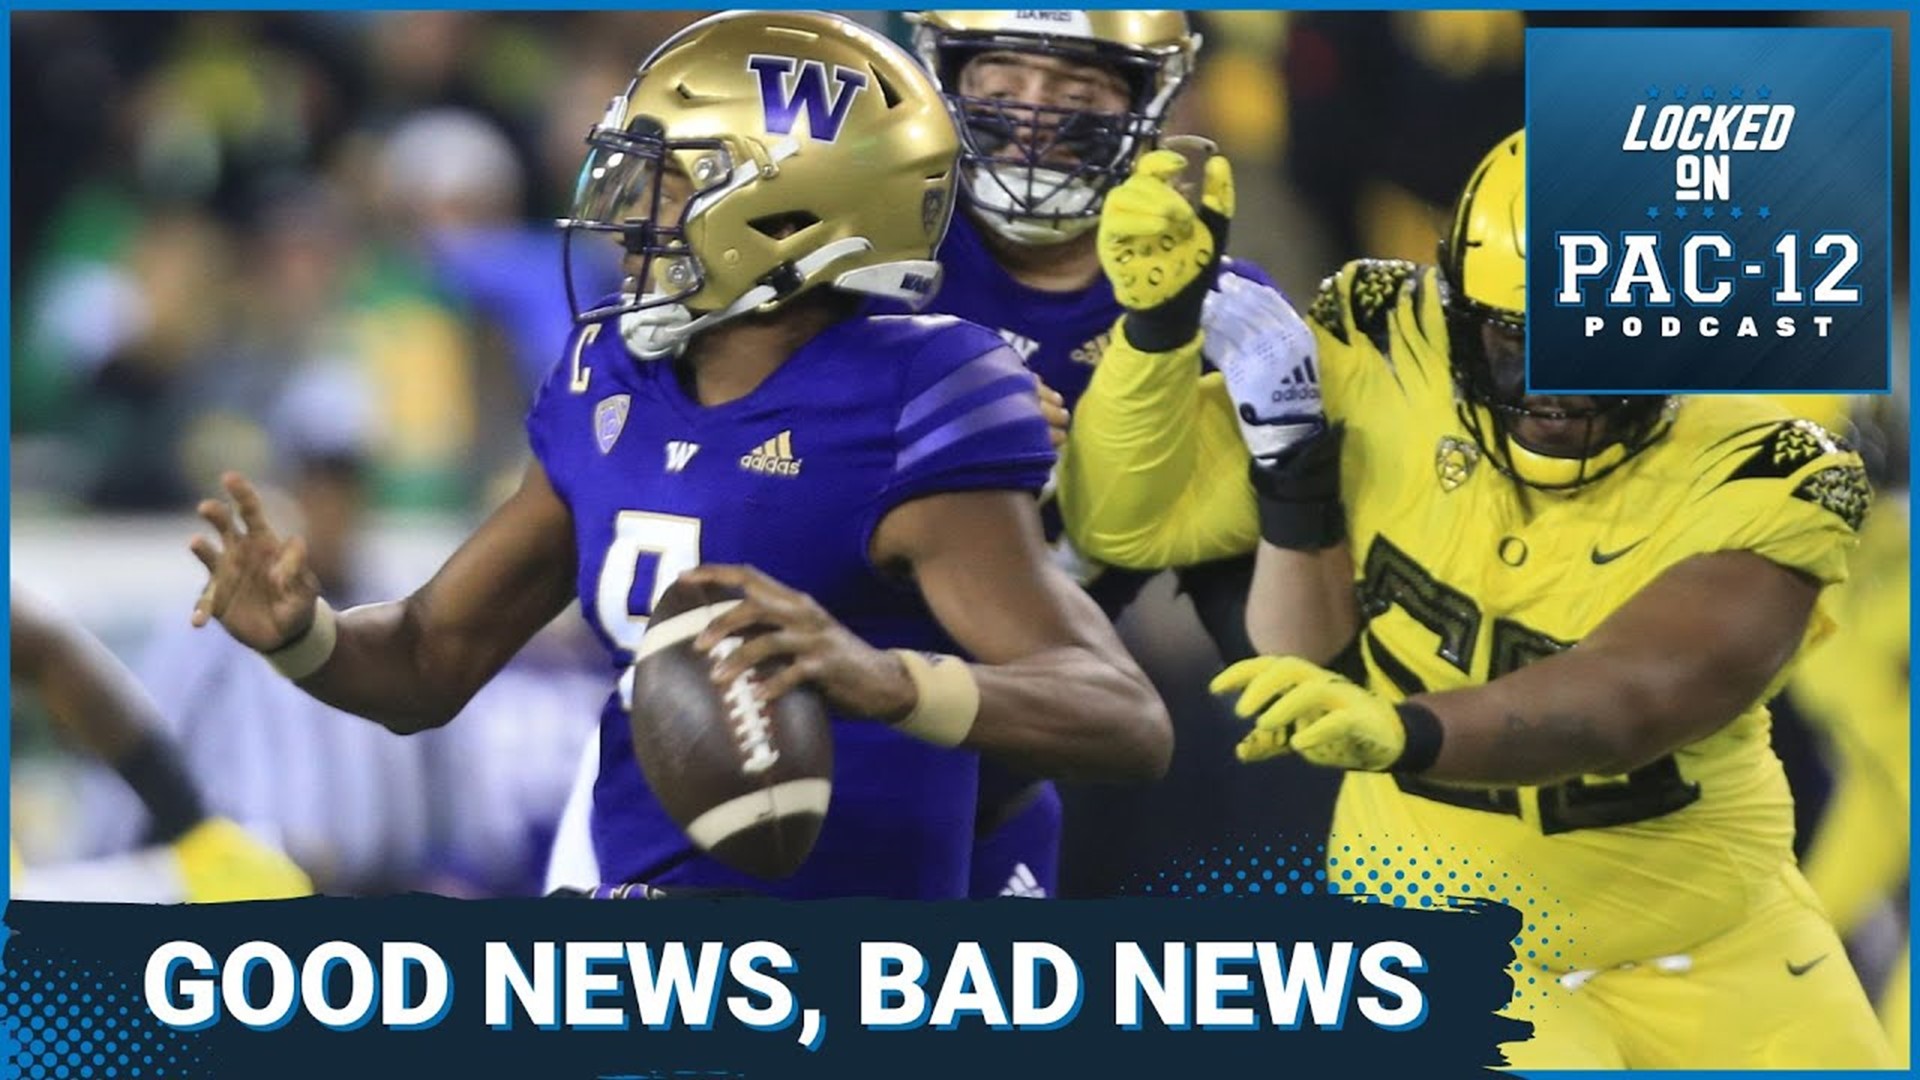 Arizona and Washington played spoiler for two teams who had the potential to break the Pac-12's drought of appearing in the College Football Playoff.